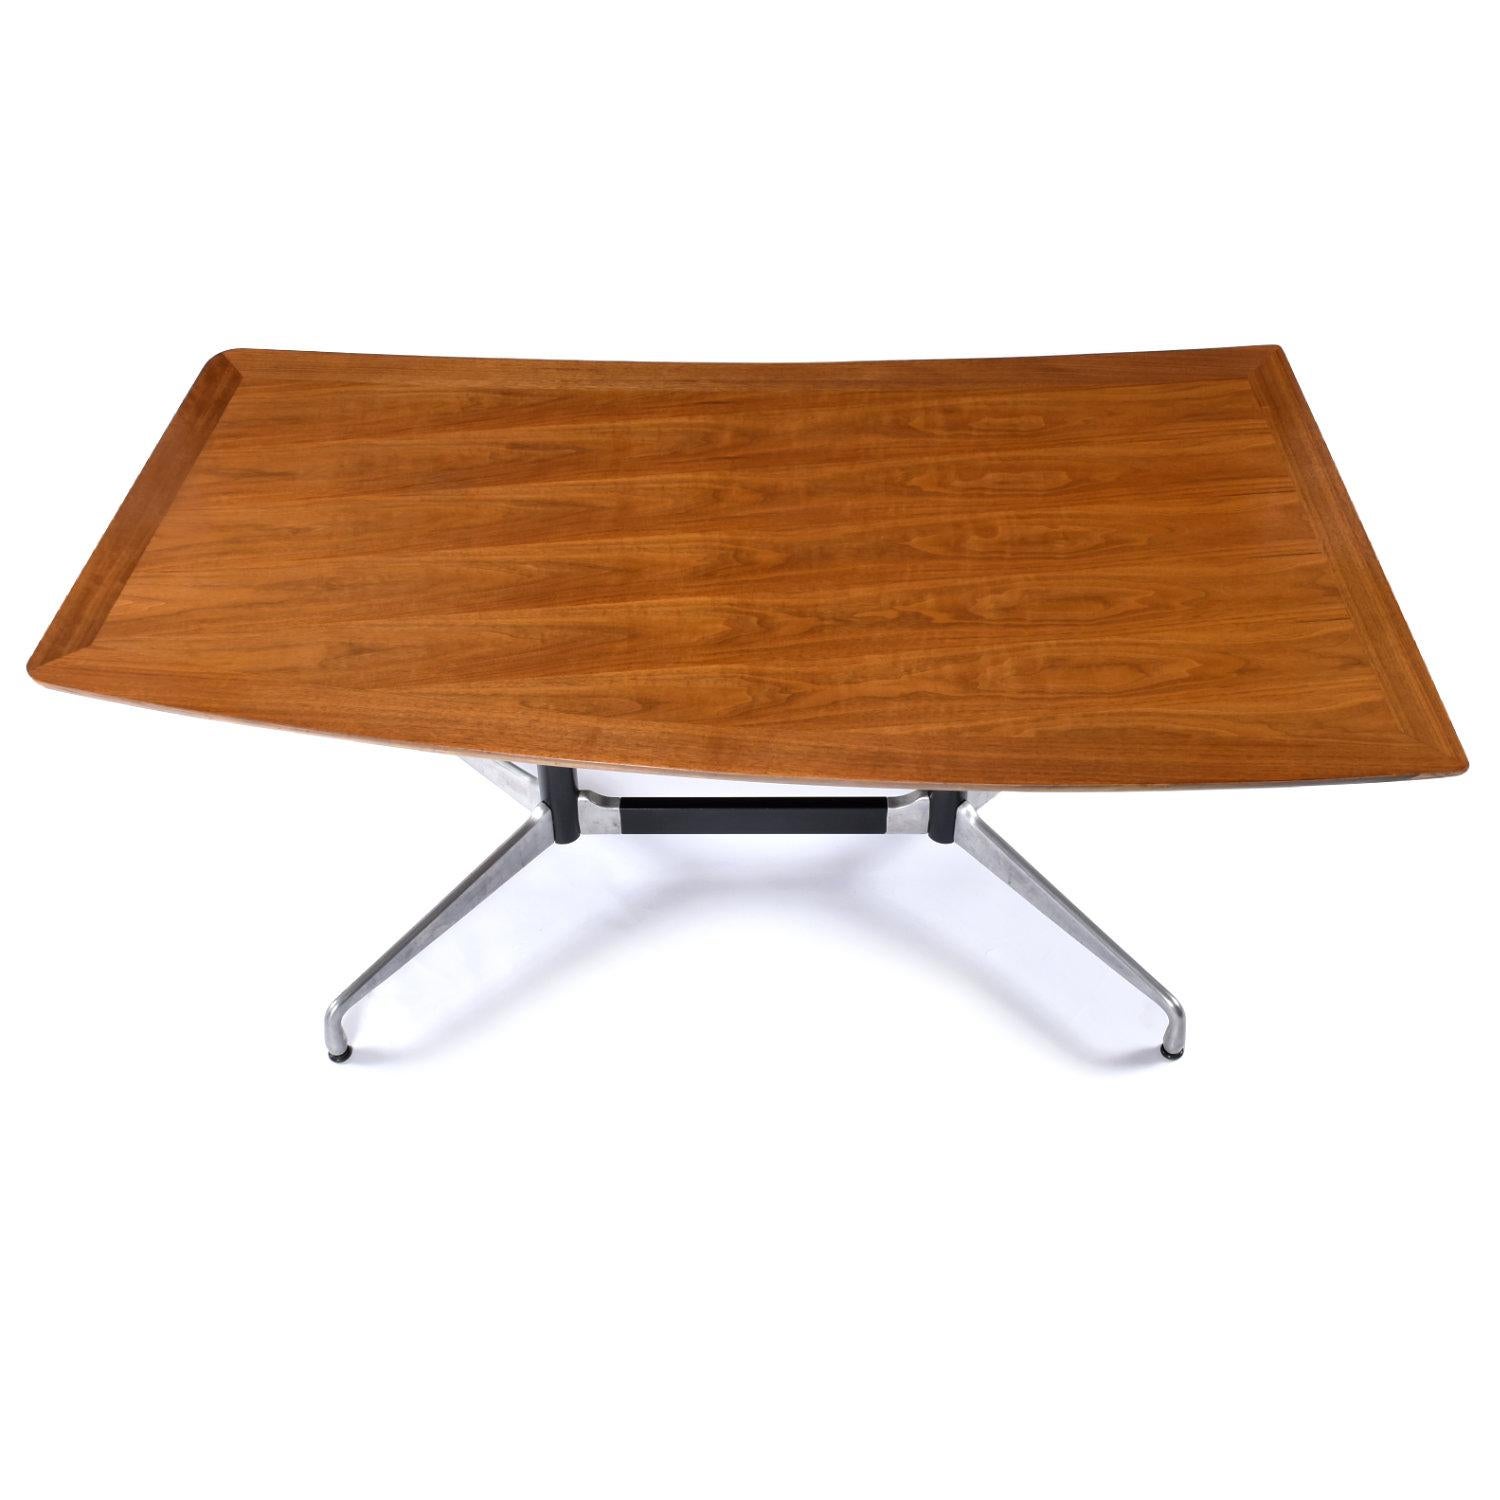 Something old, something new, something borrowed… but it’s not blue. This Mid-Century Modern boomerang desk is a new creation made from vintage parts. The restored Mid-Century Modern boomerang table top has been married to an authentic Eames table